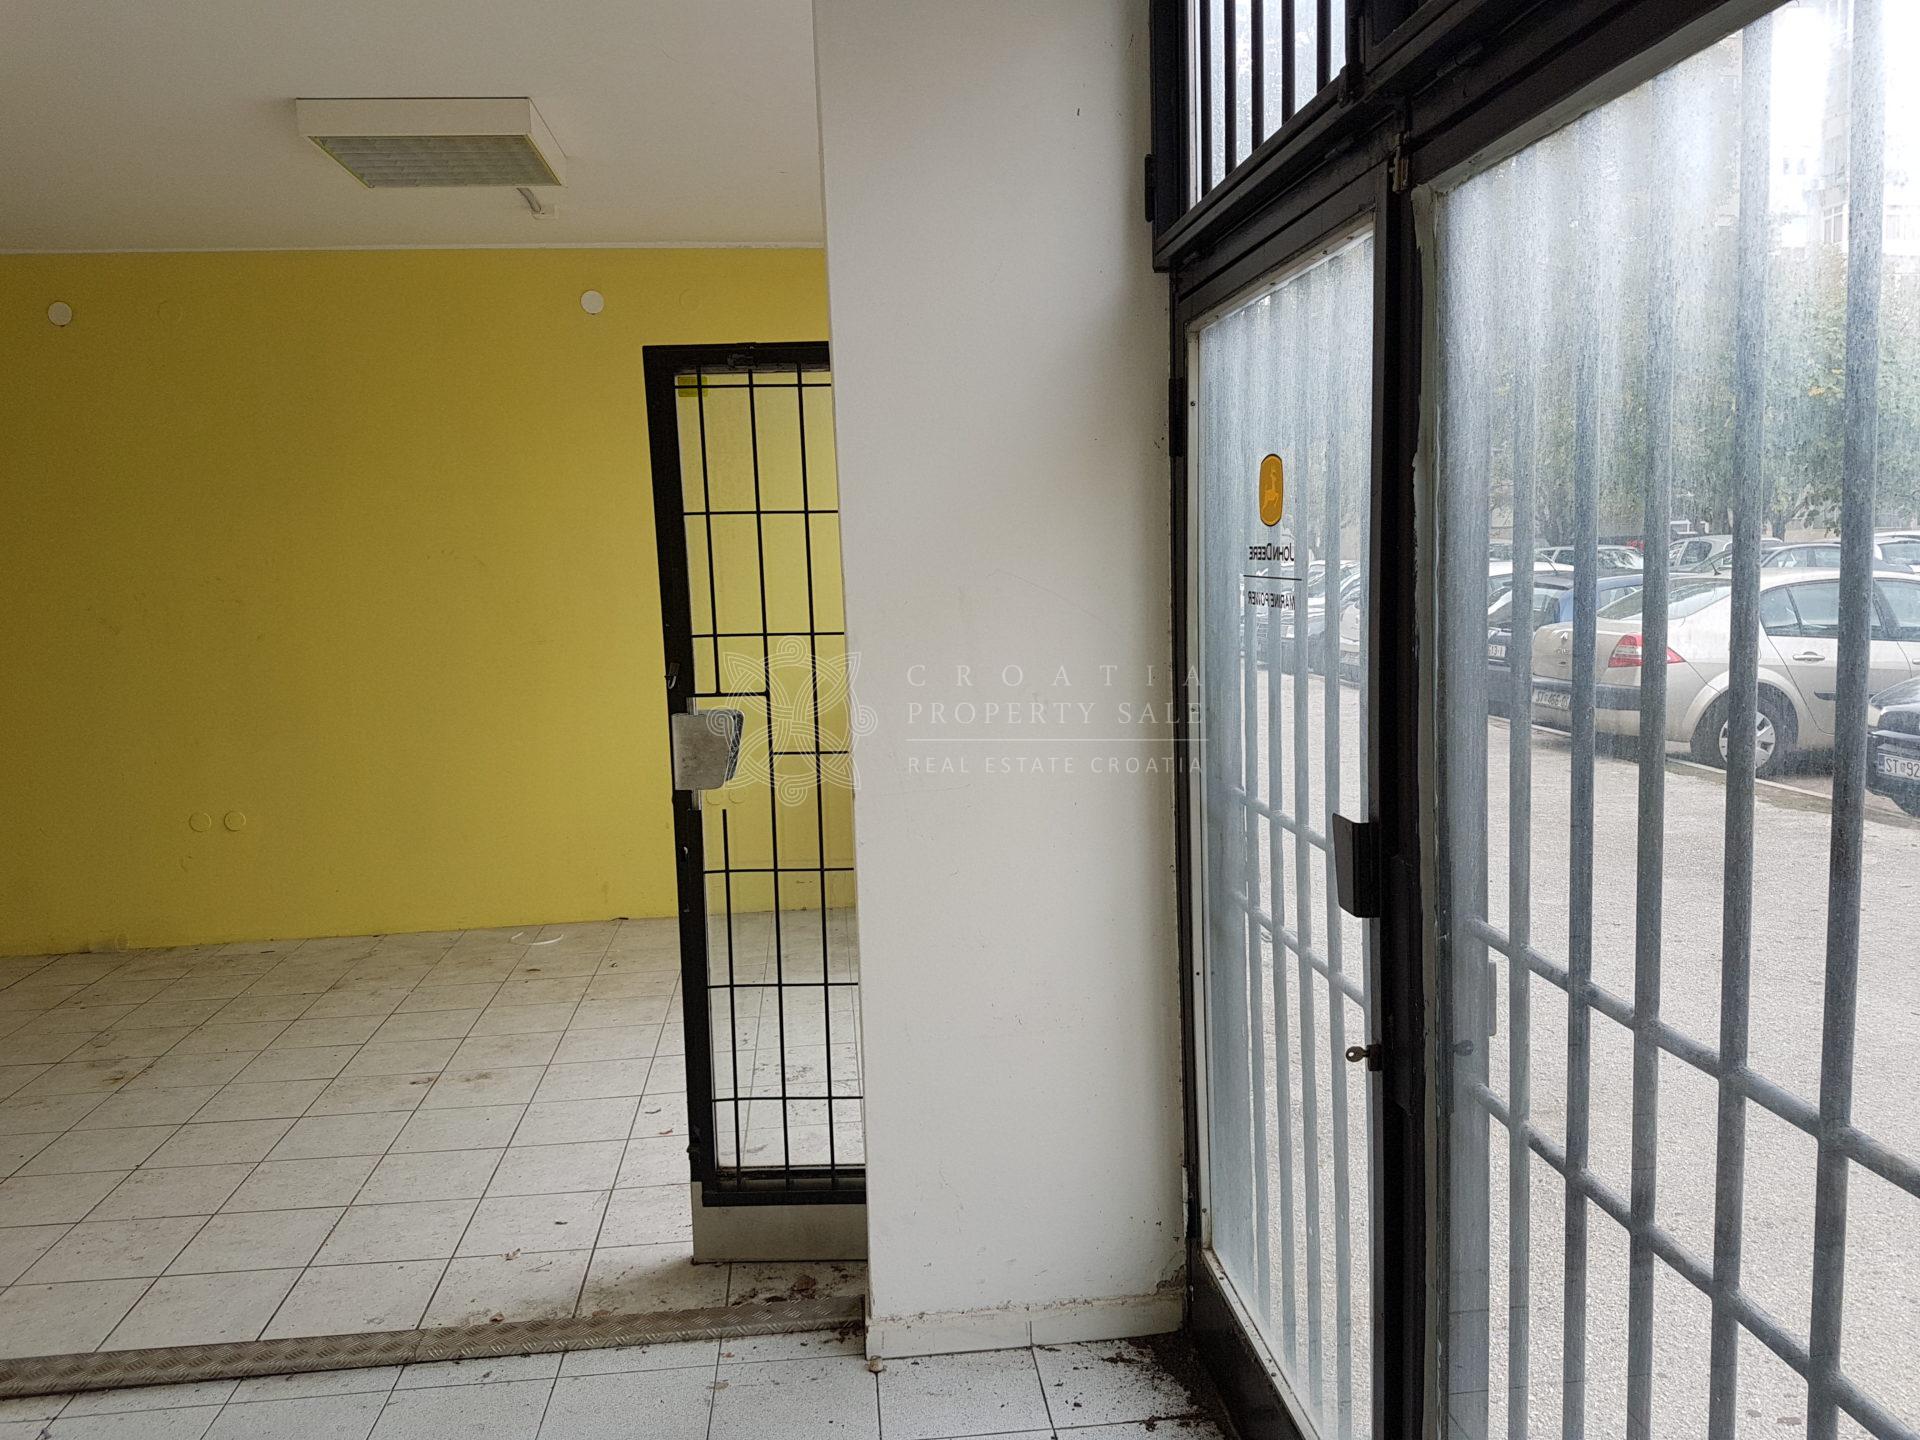 Croatia Split office space commercial real estate for sale